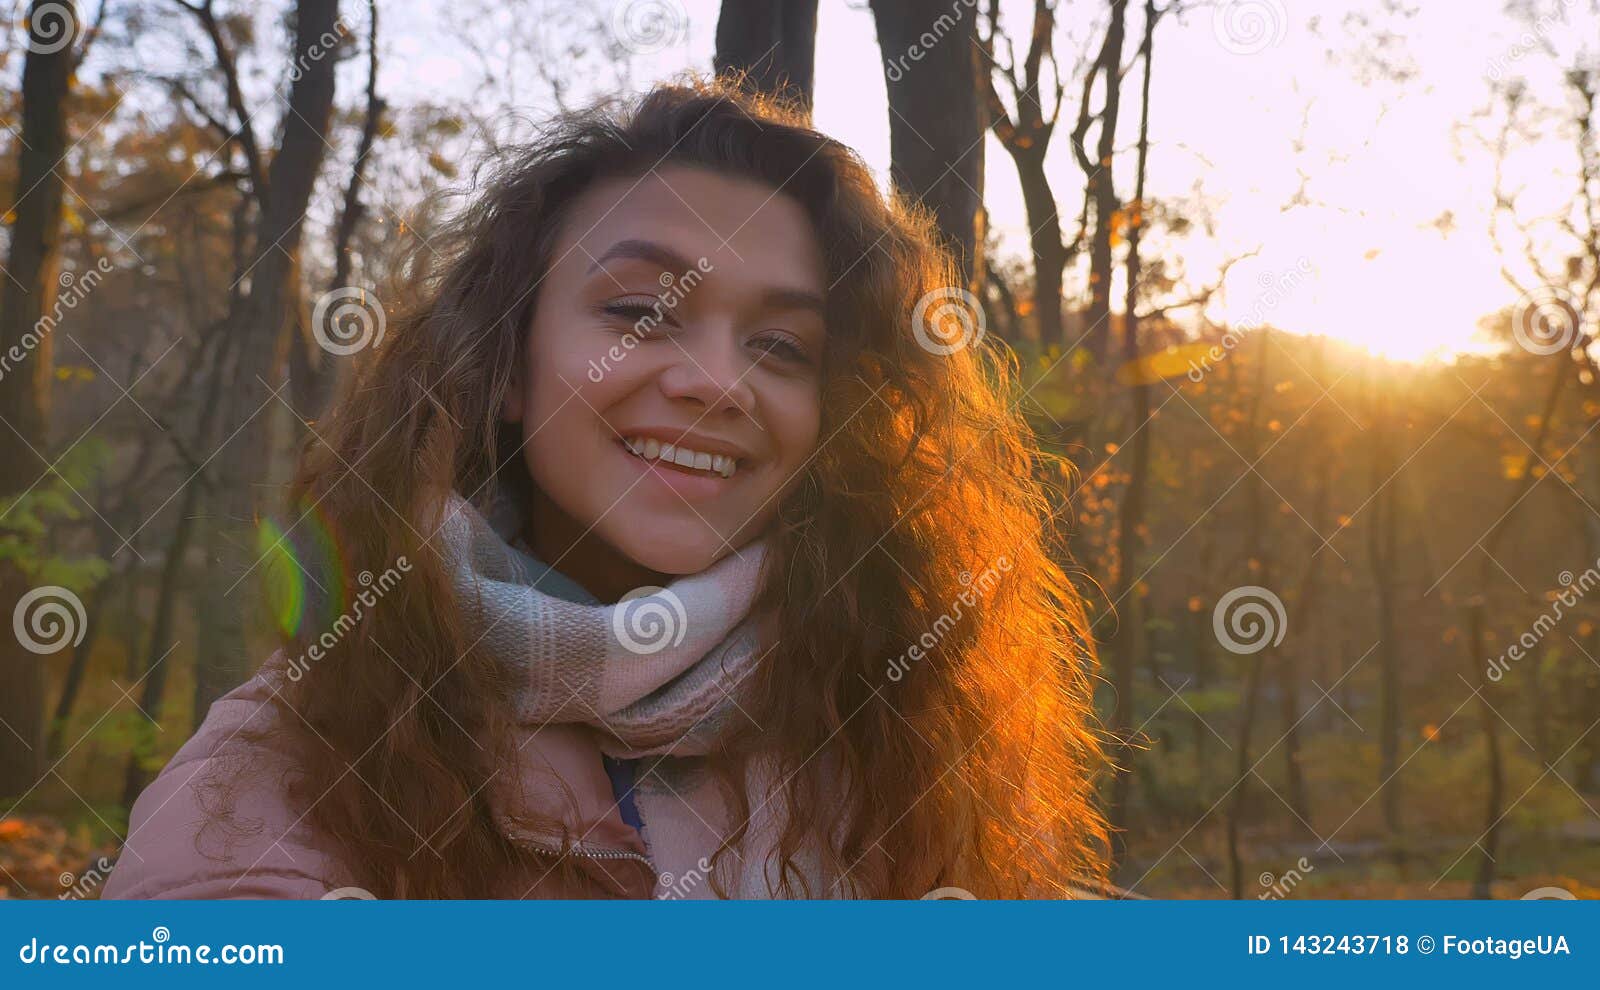 selfie-photo of curly-haired caucasian girl watching smilingly into camera in sunny autumnal park.